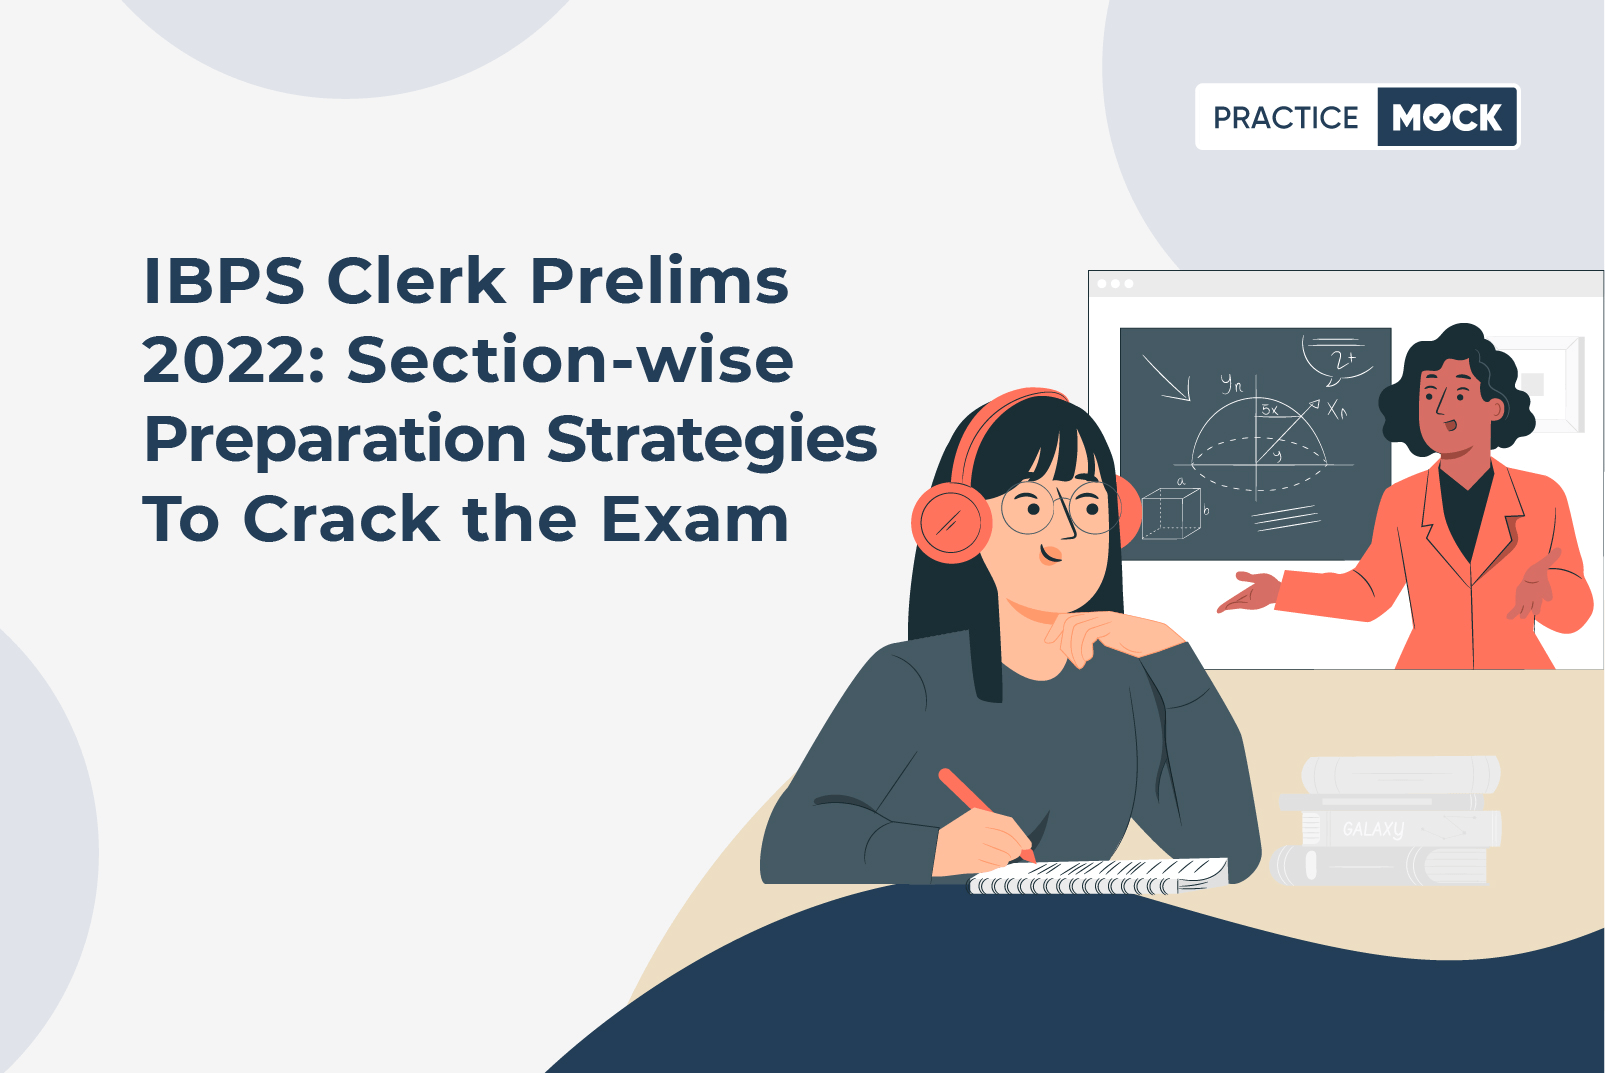 IBPS Clerk Prelims 2022: Section-wise Tips to Crack the Exam